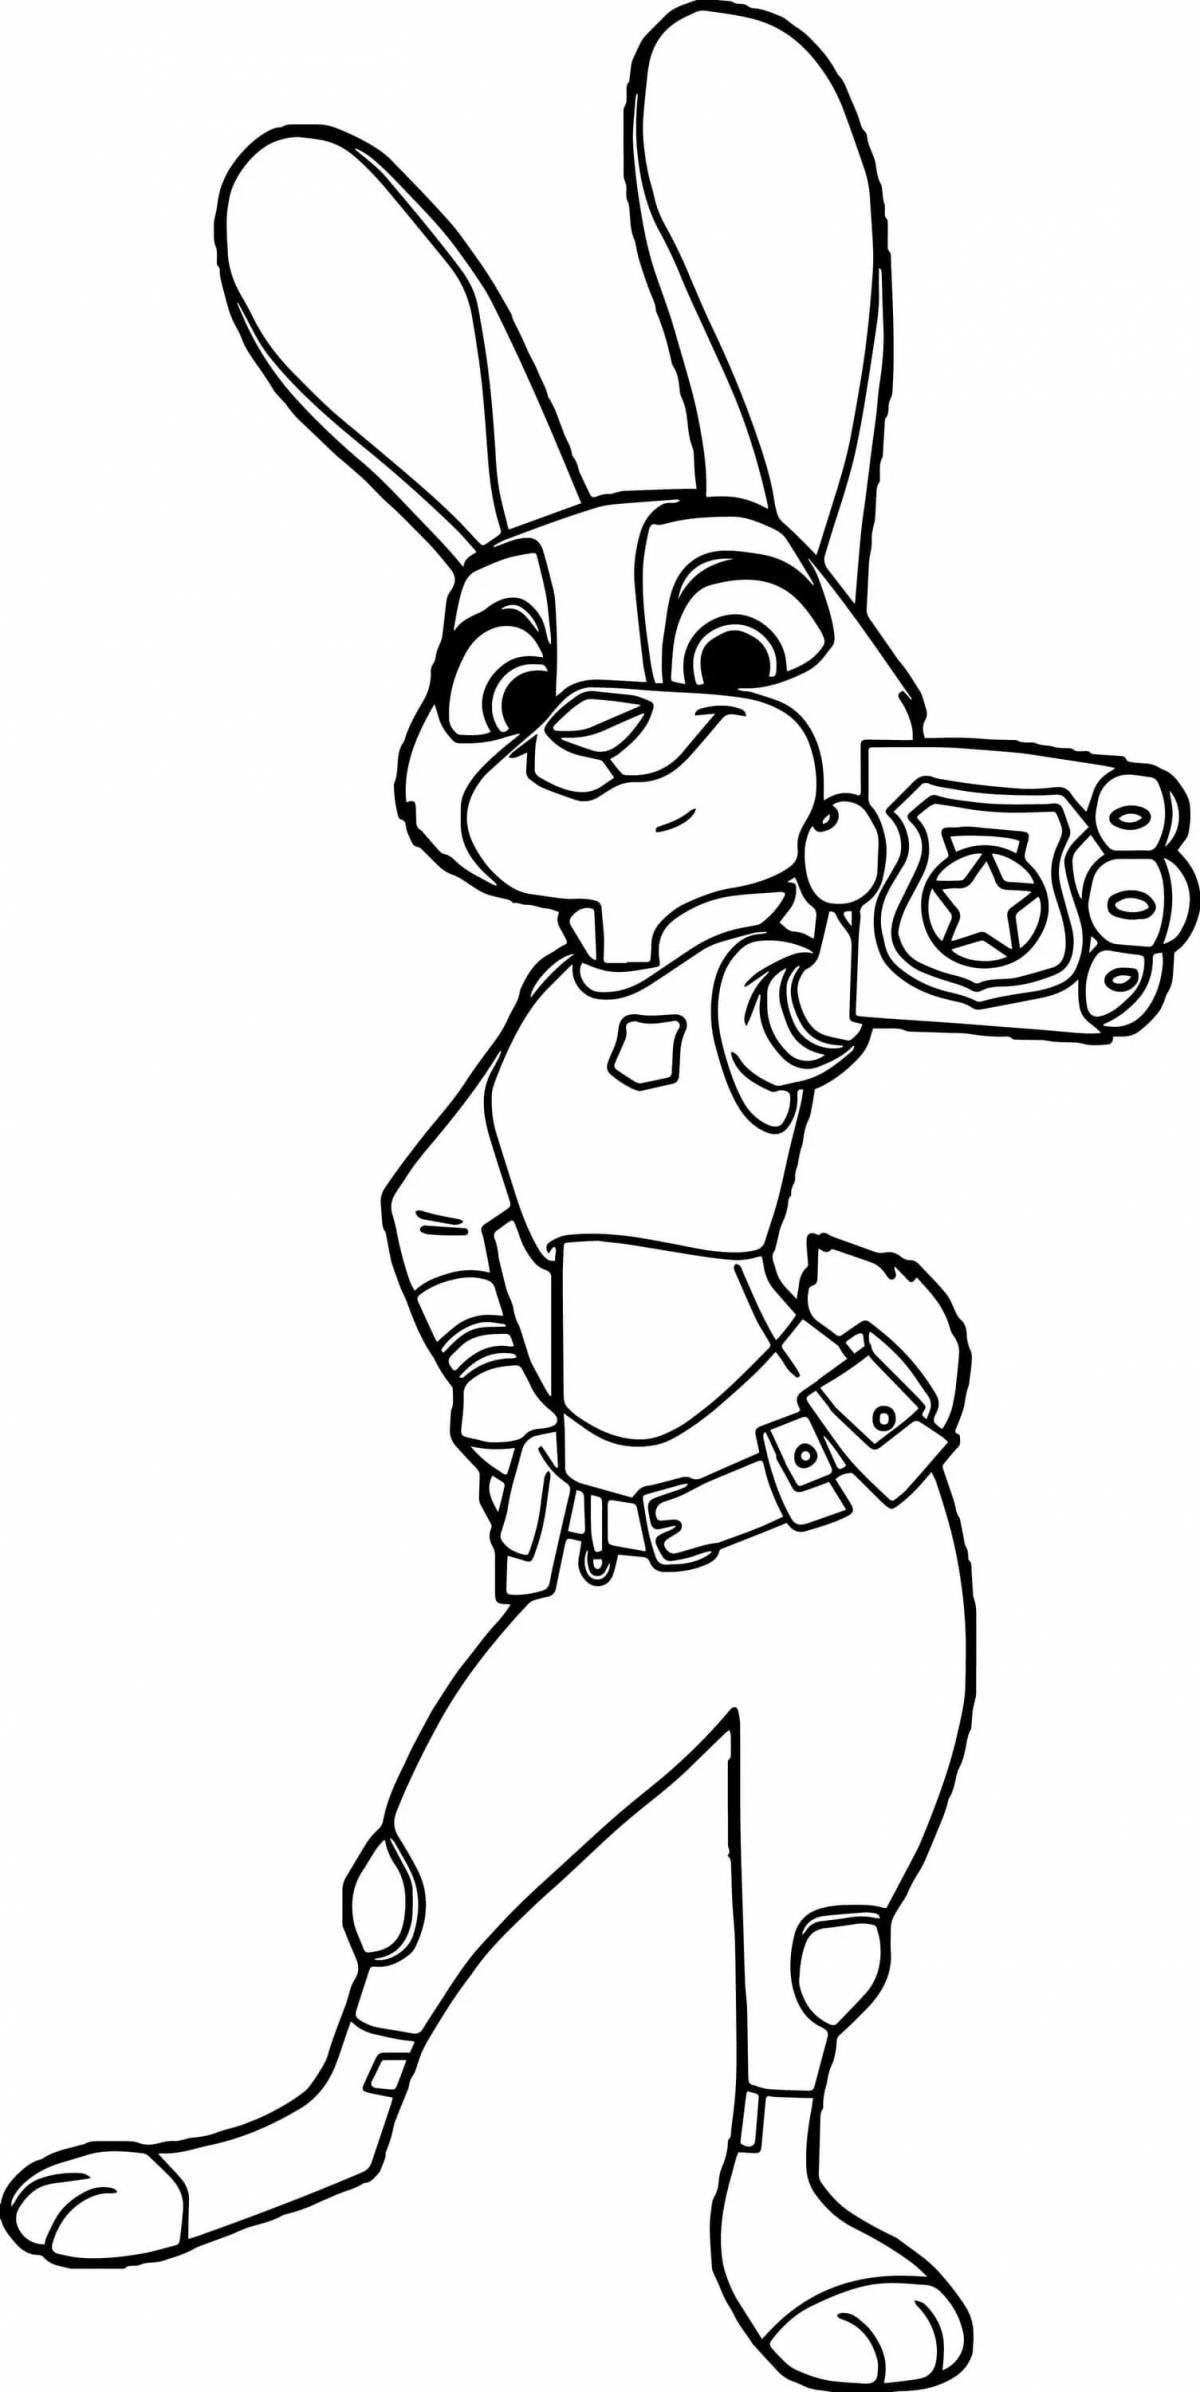 Judy hopps colorful coloring page